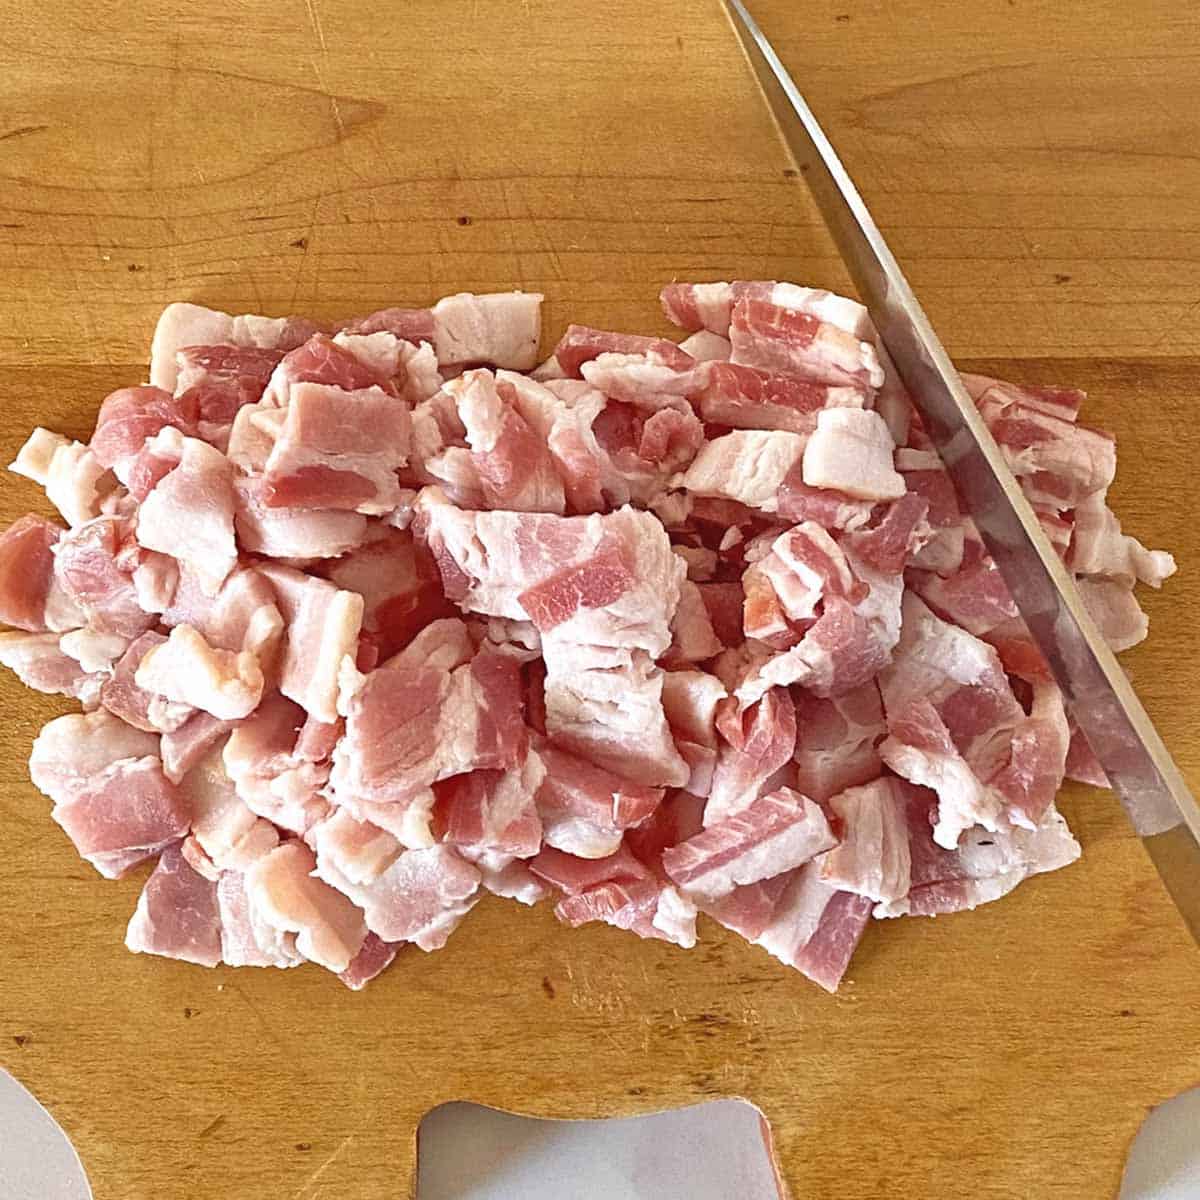 A pile of chopped bacon and a knife on a cutting board.